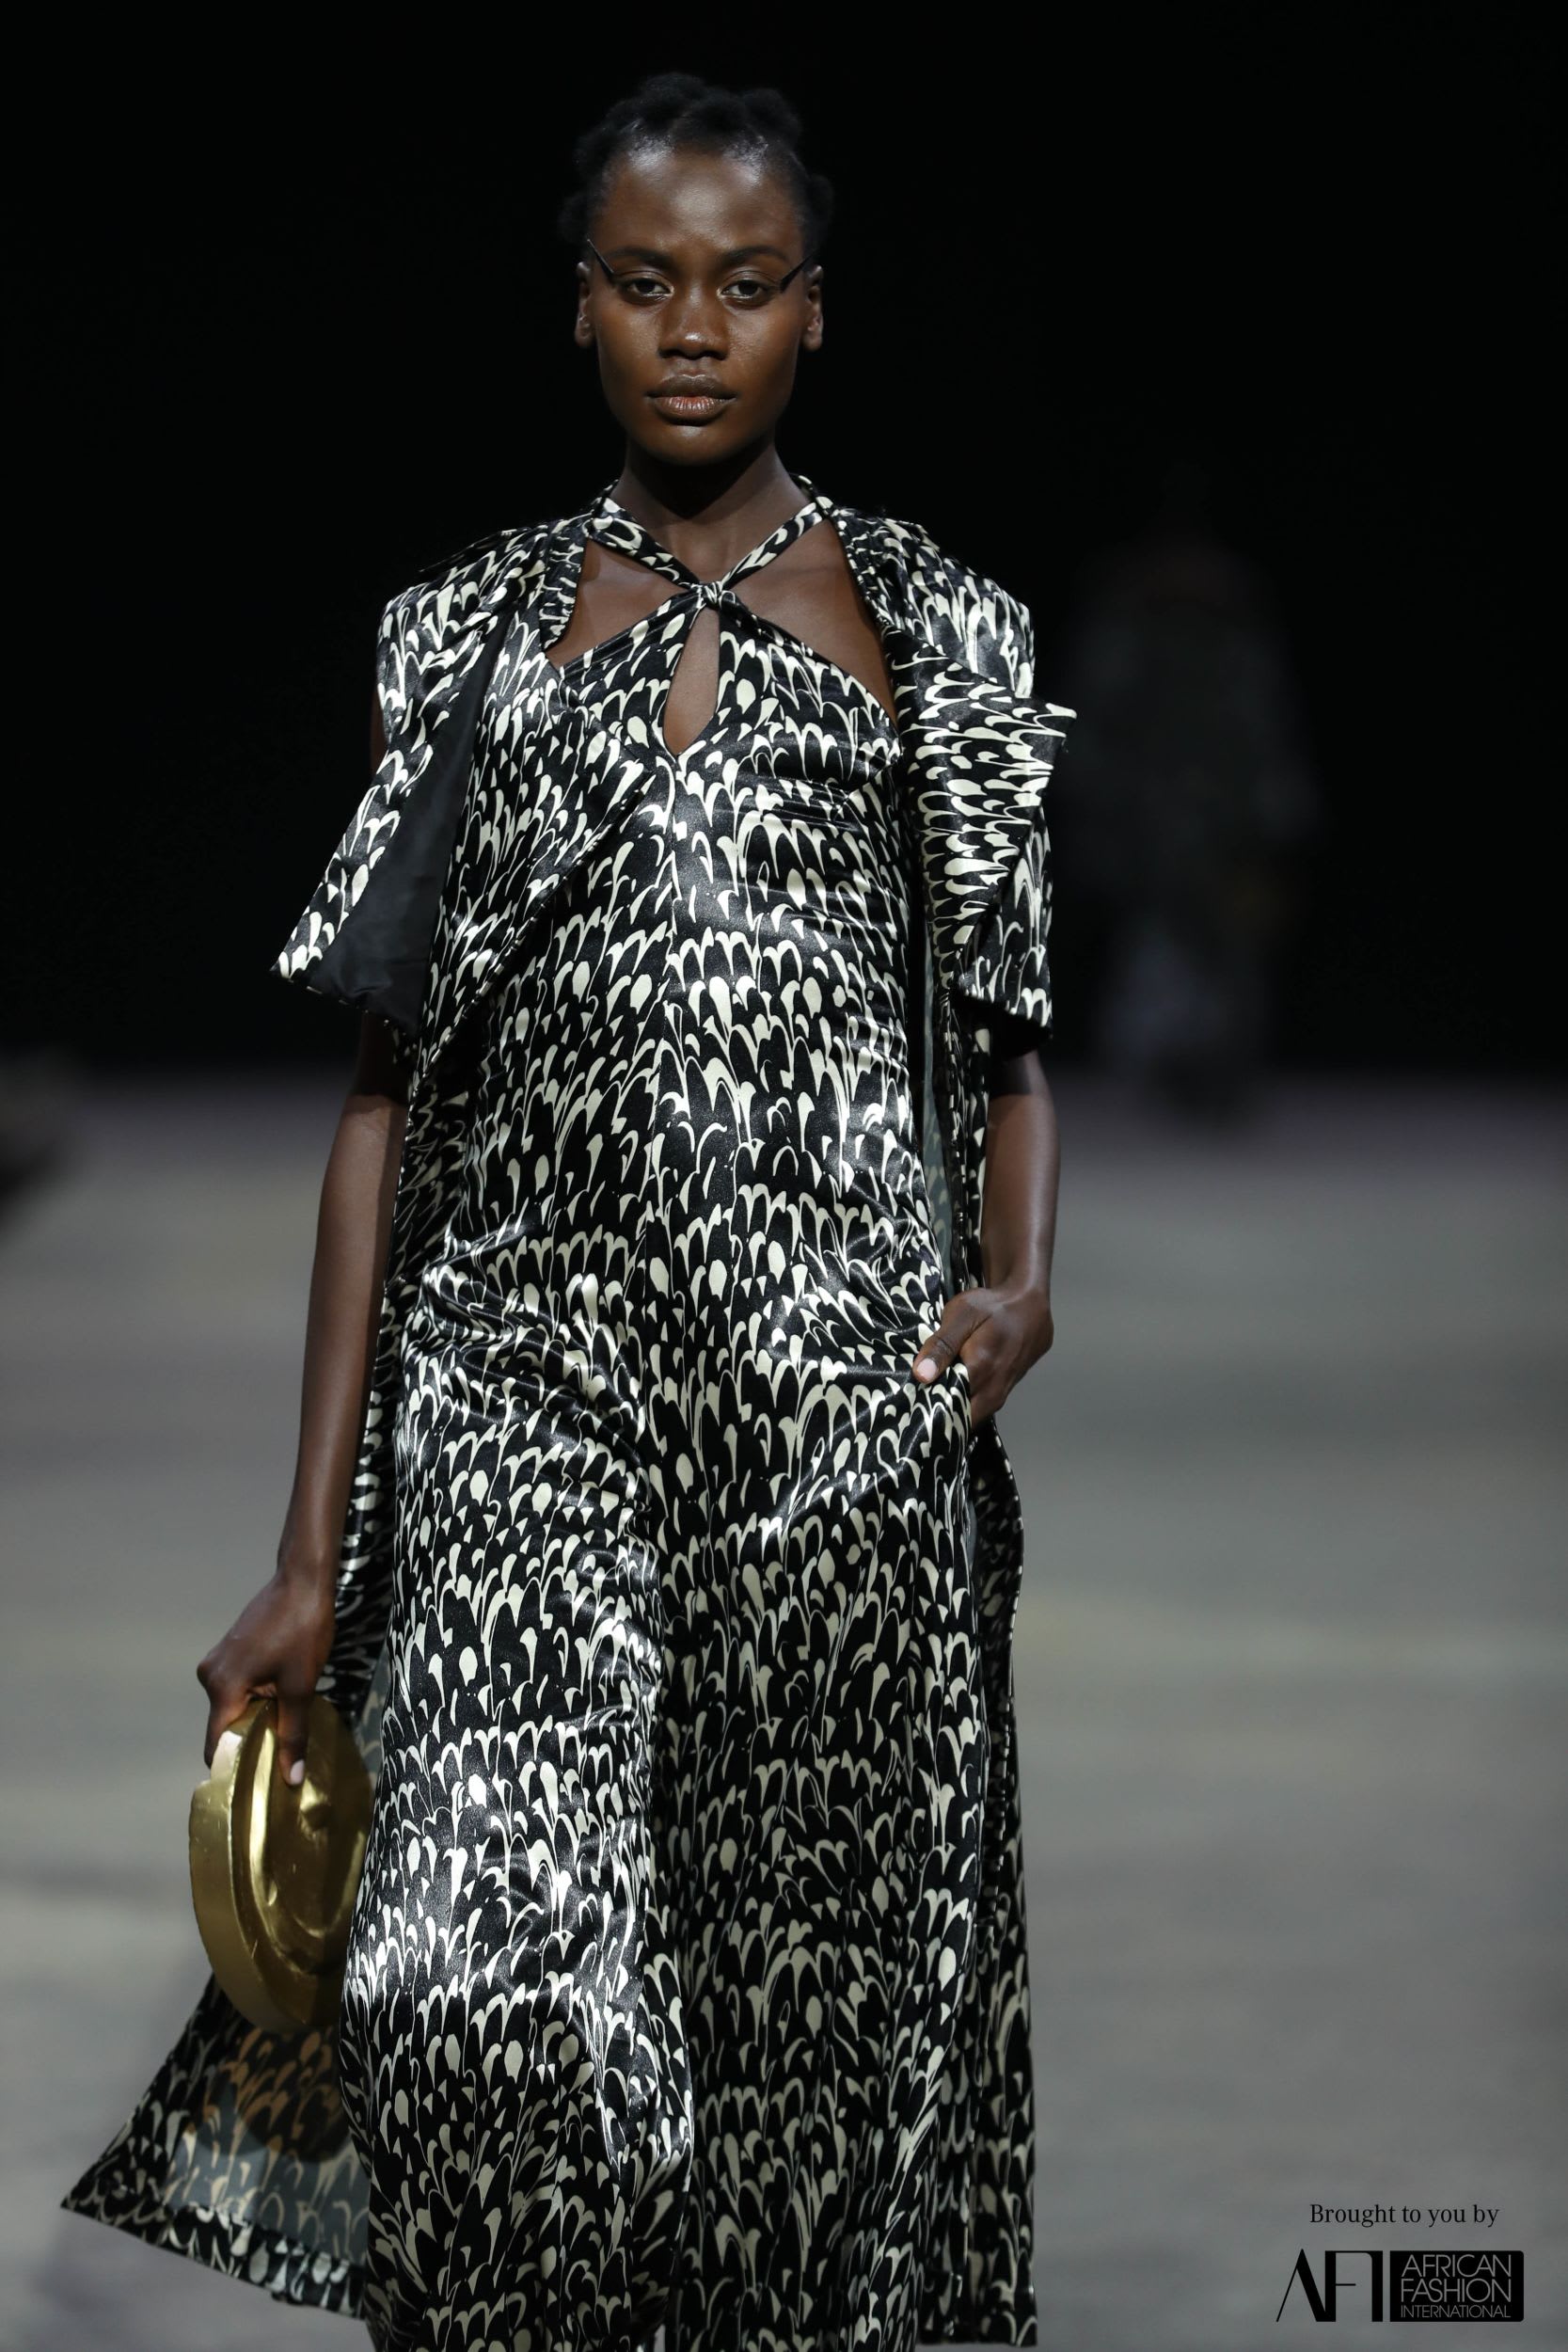 #AFICTFW18 | Tongoro by Sarah Diouf | BN Style